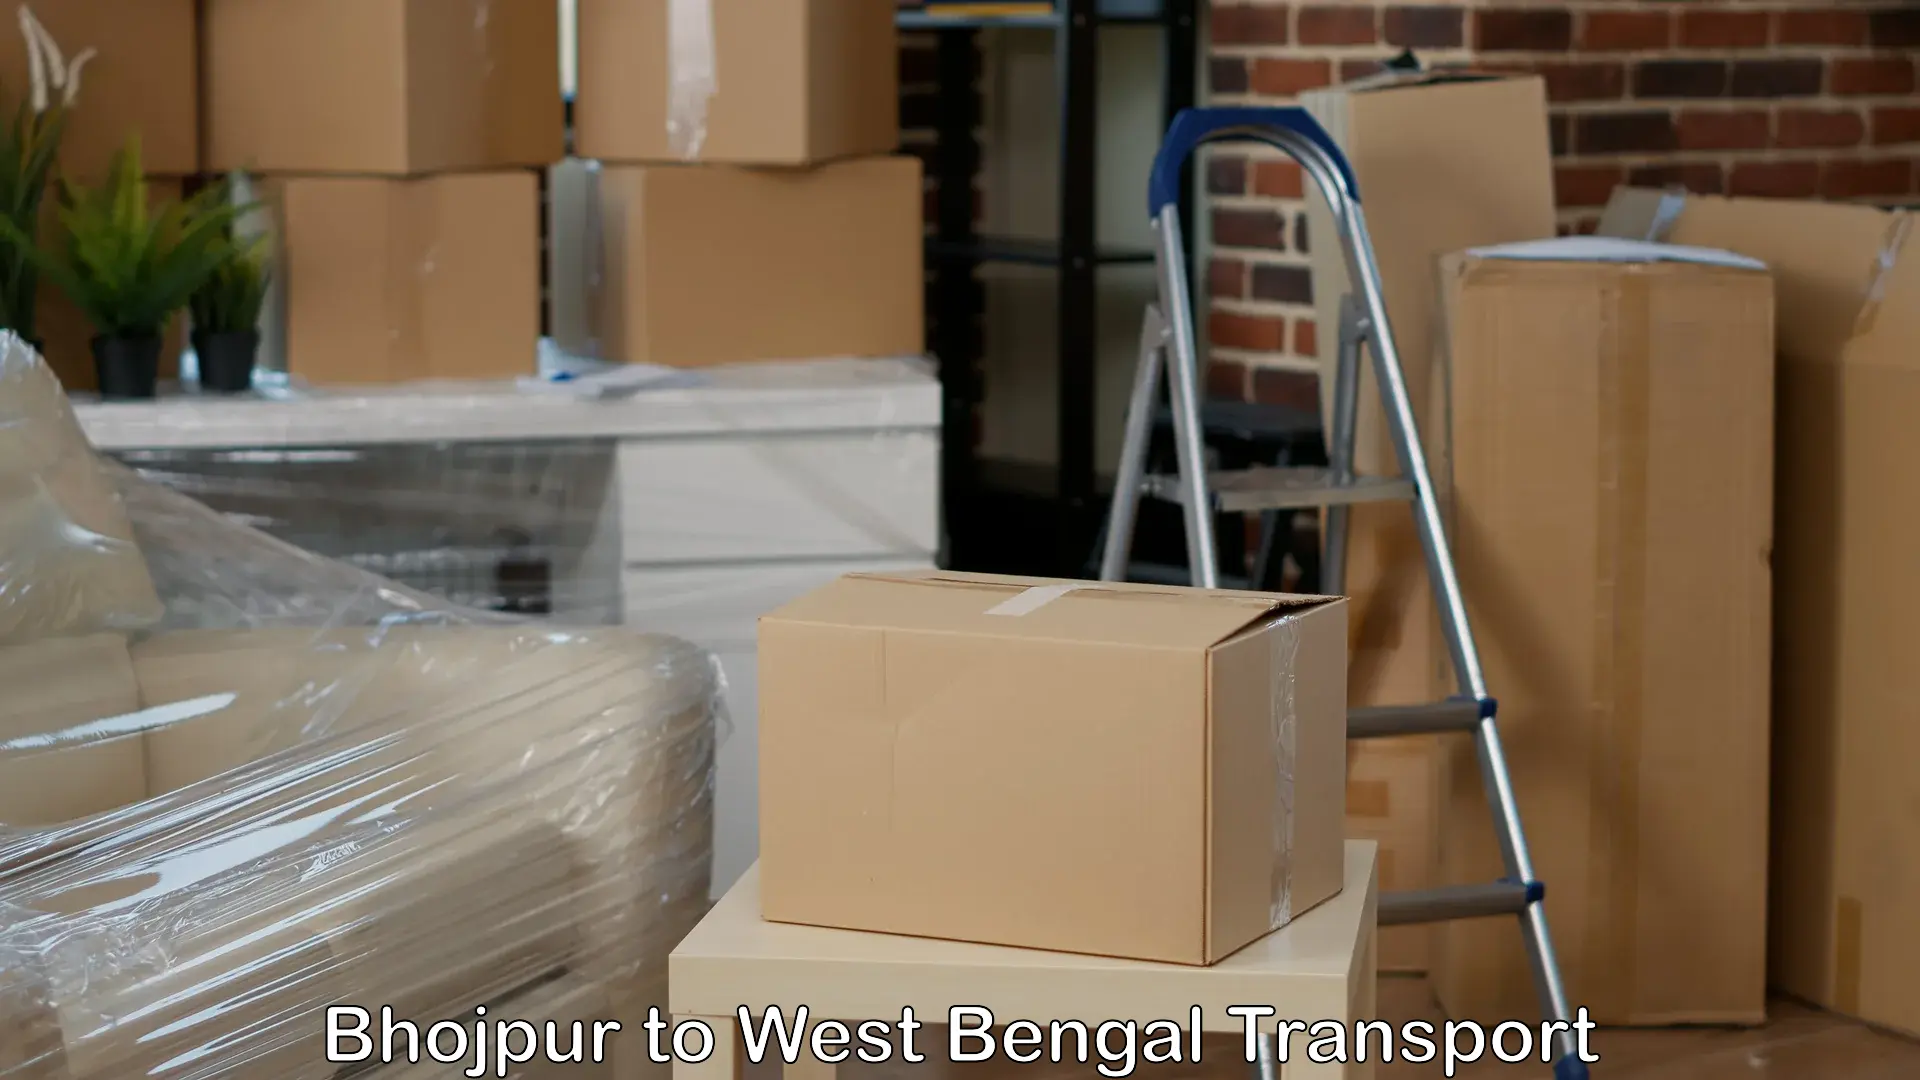 Furniture transport service Bhojpur to Hooghly